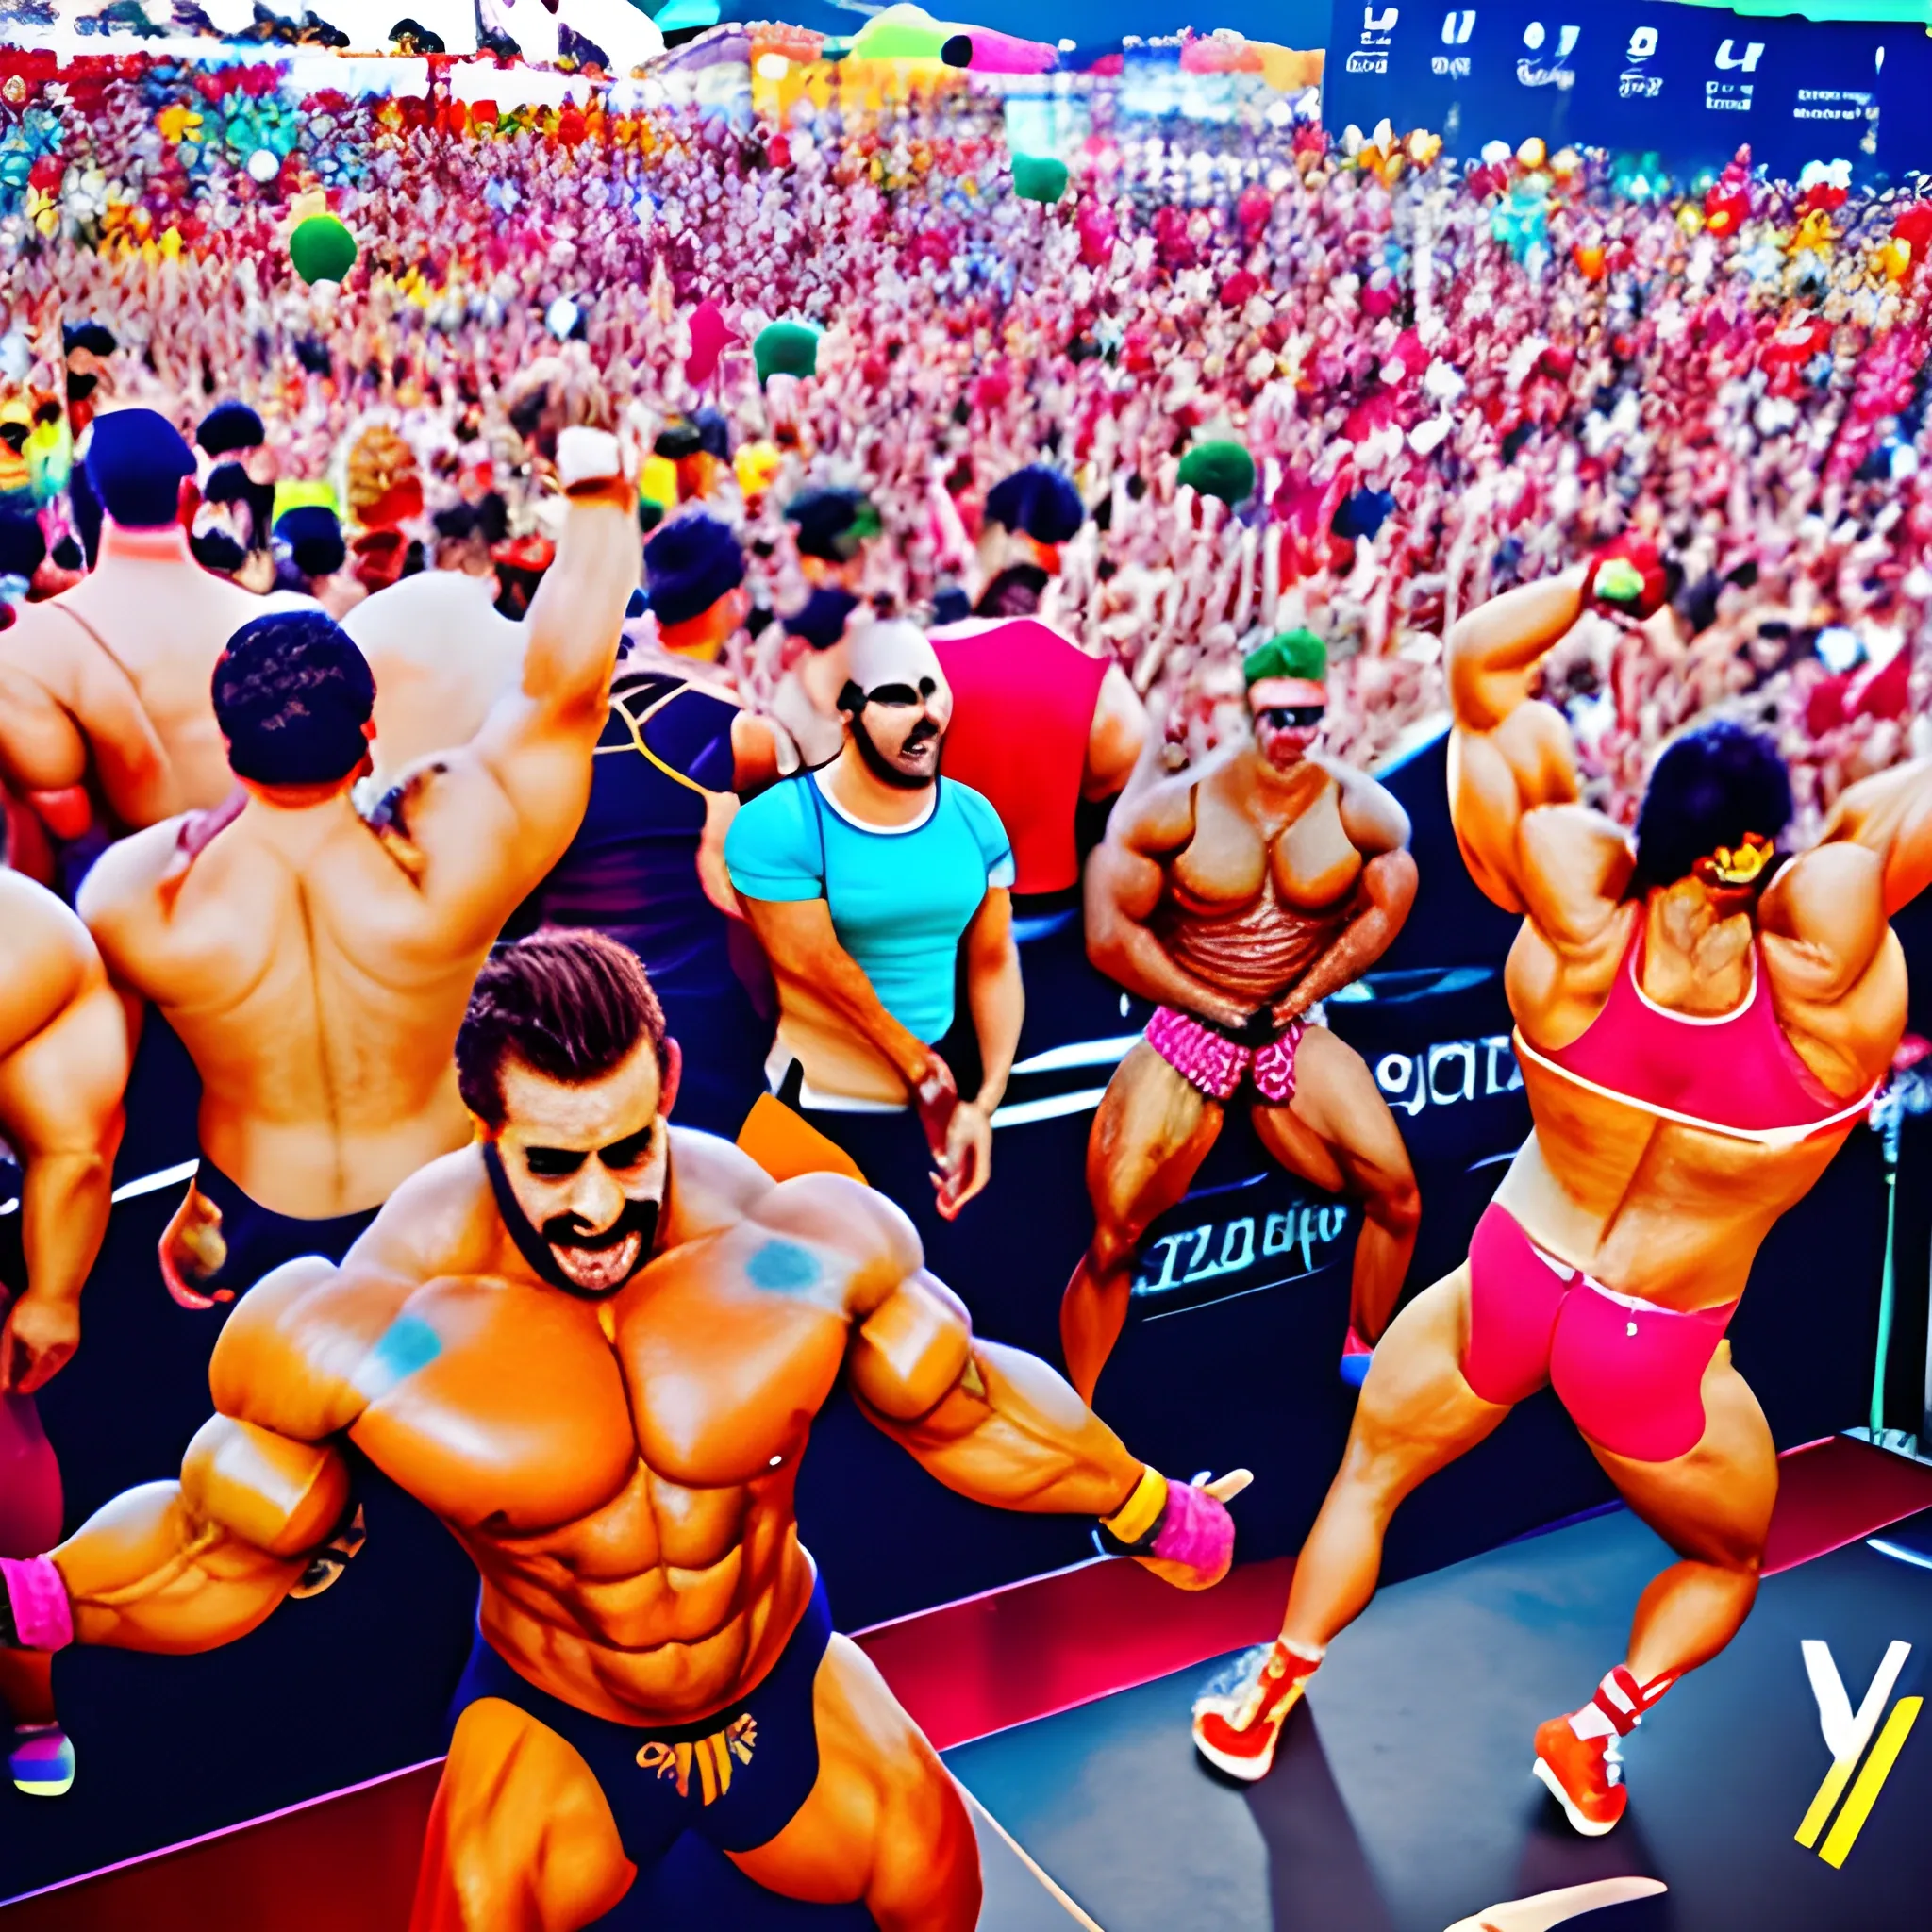 Bodybuilders dancing at a Circuit festival in Sitges, Trippy